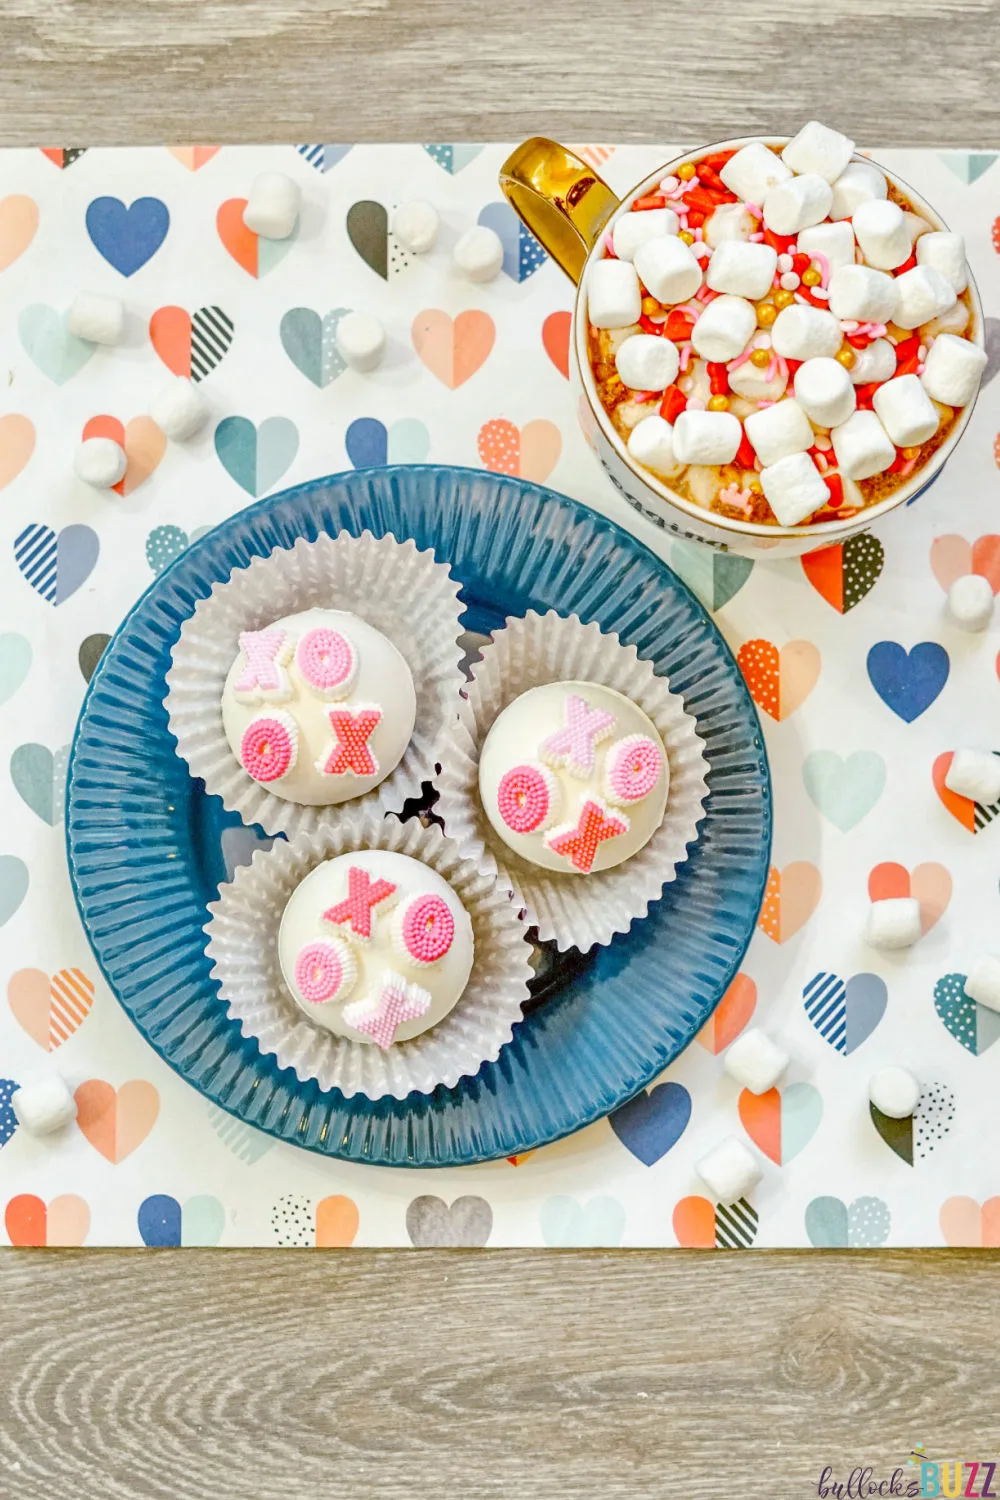 XOXO Valentine's hot cocoa bombs are fun and not too hard to make. Plus they taste amazing! 